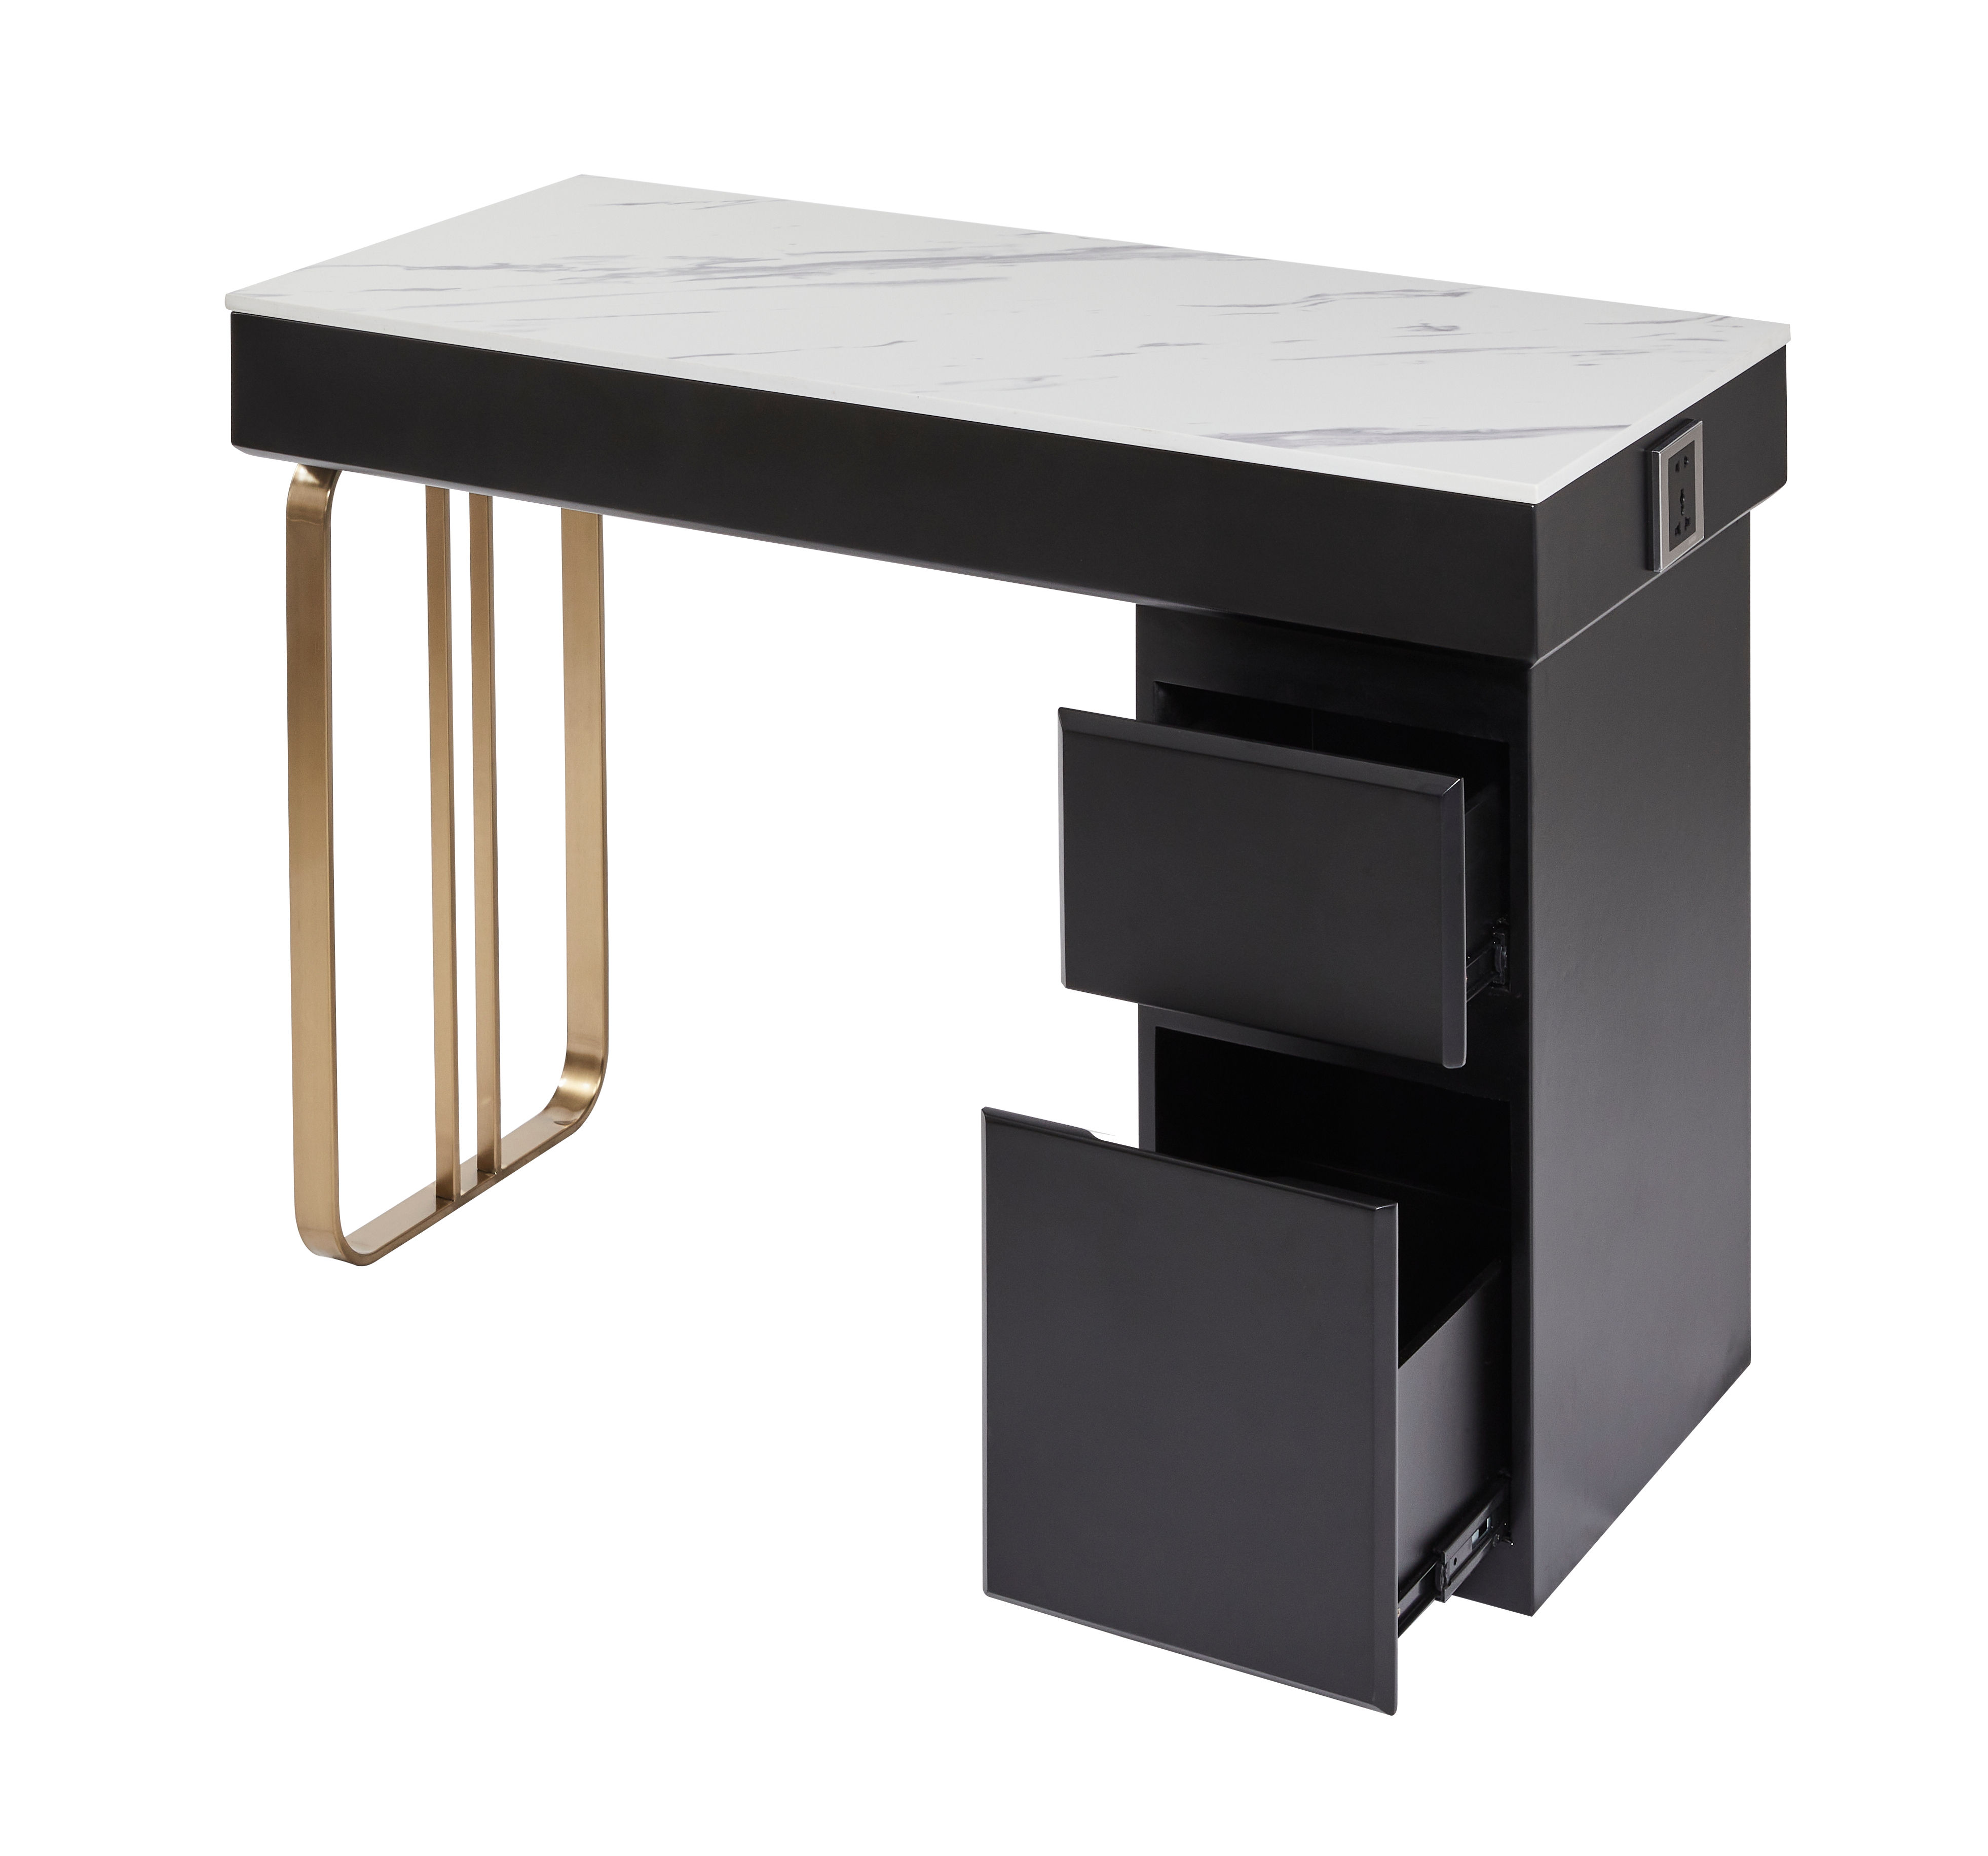 The Alia Nail Desk with White Patterned Stone Top - Black & Gold by SEC